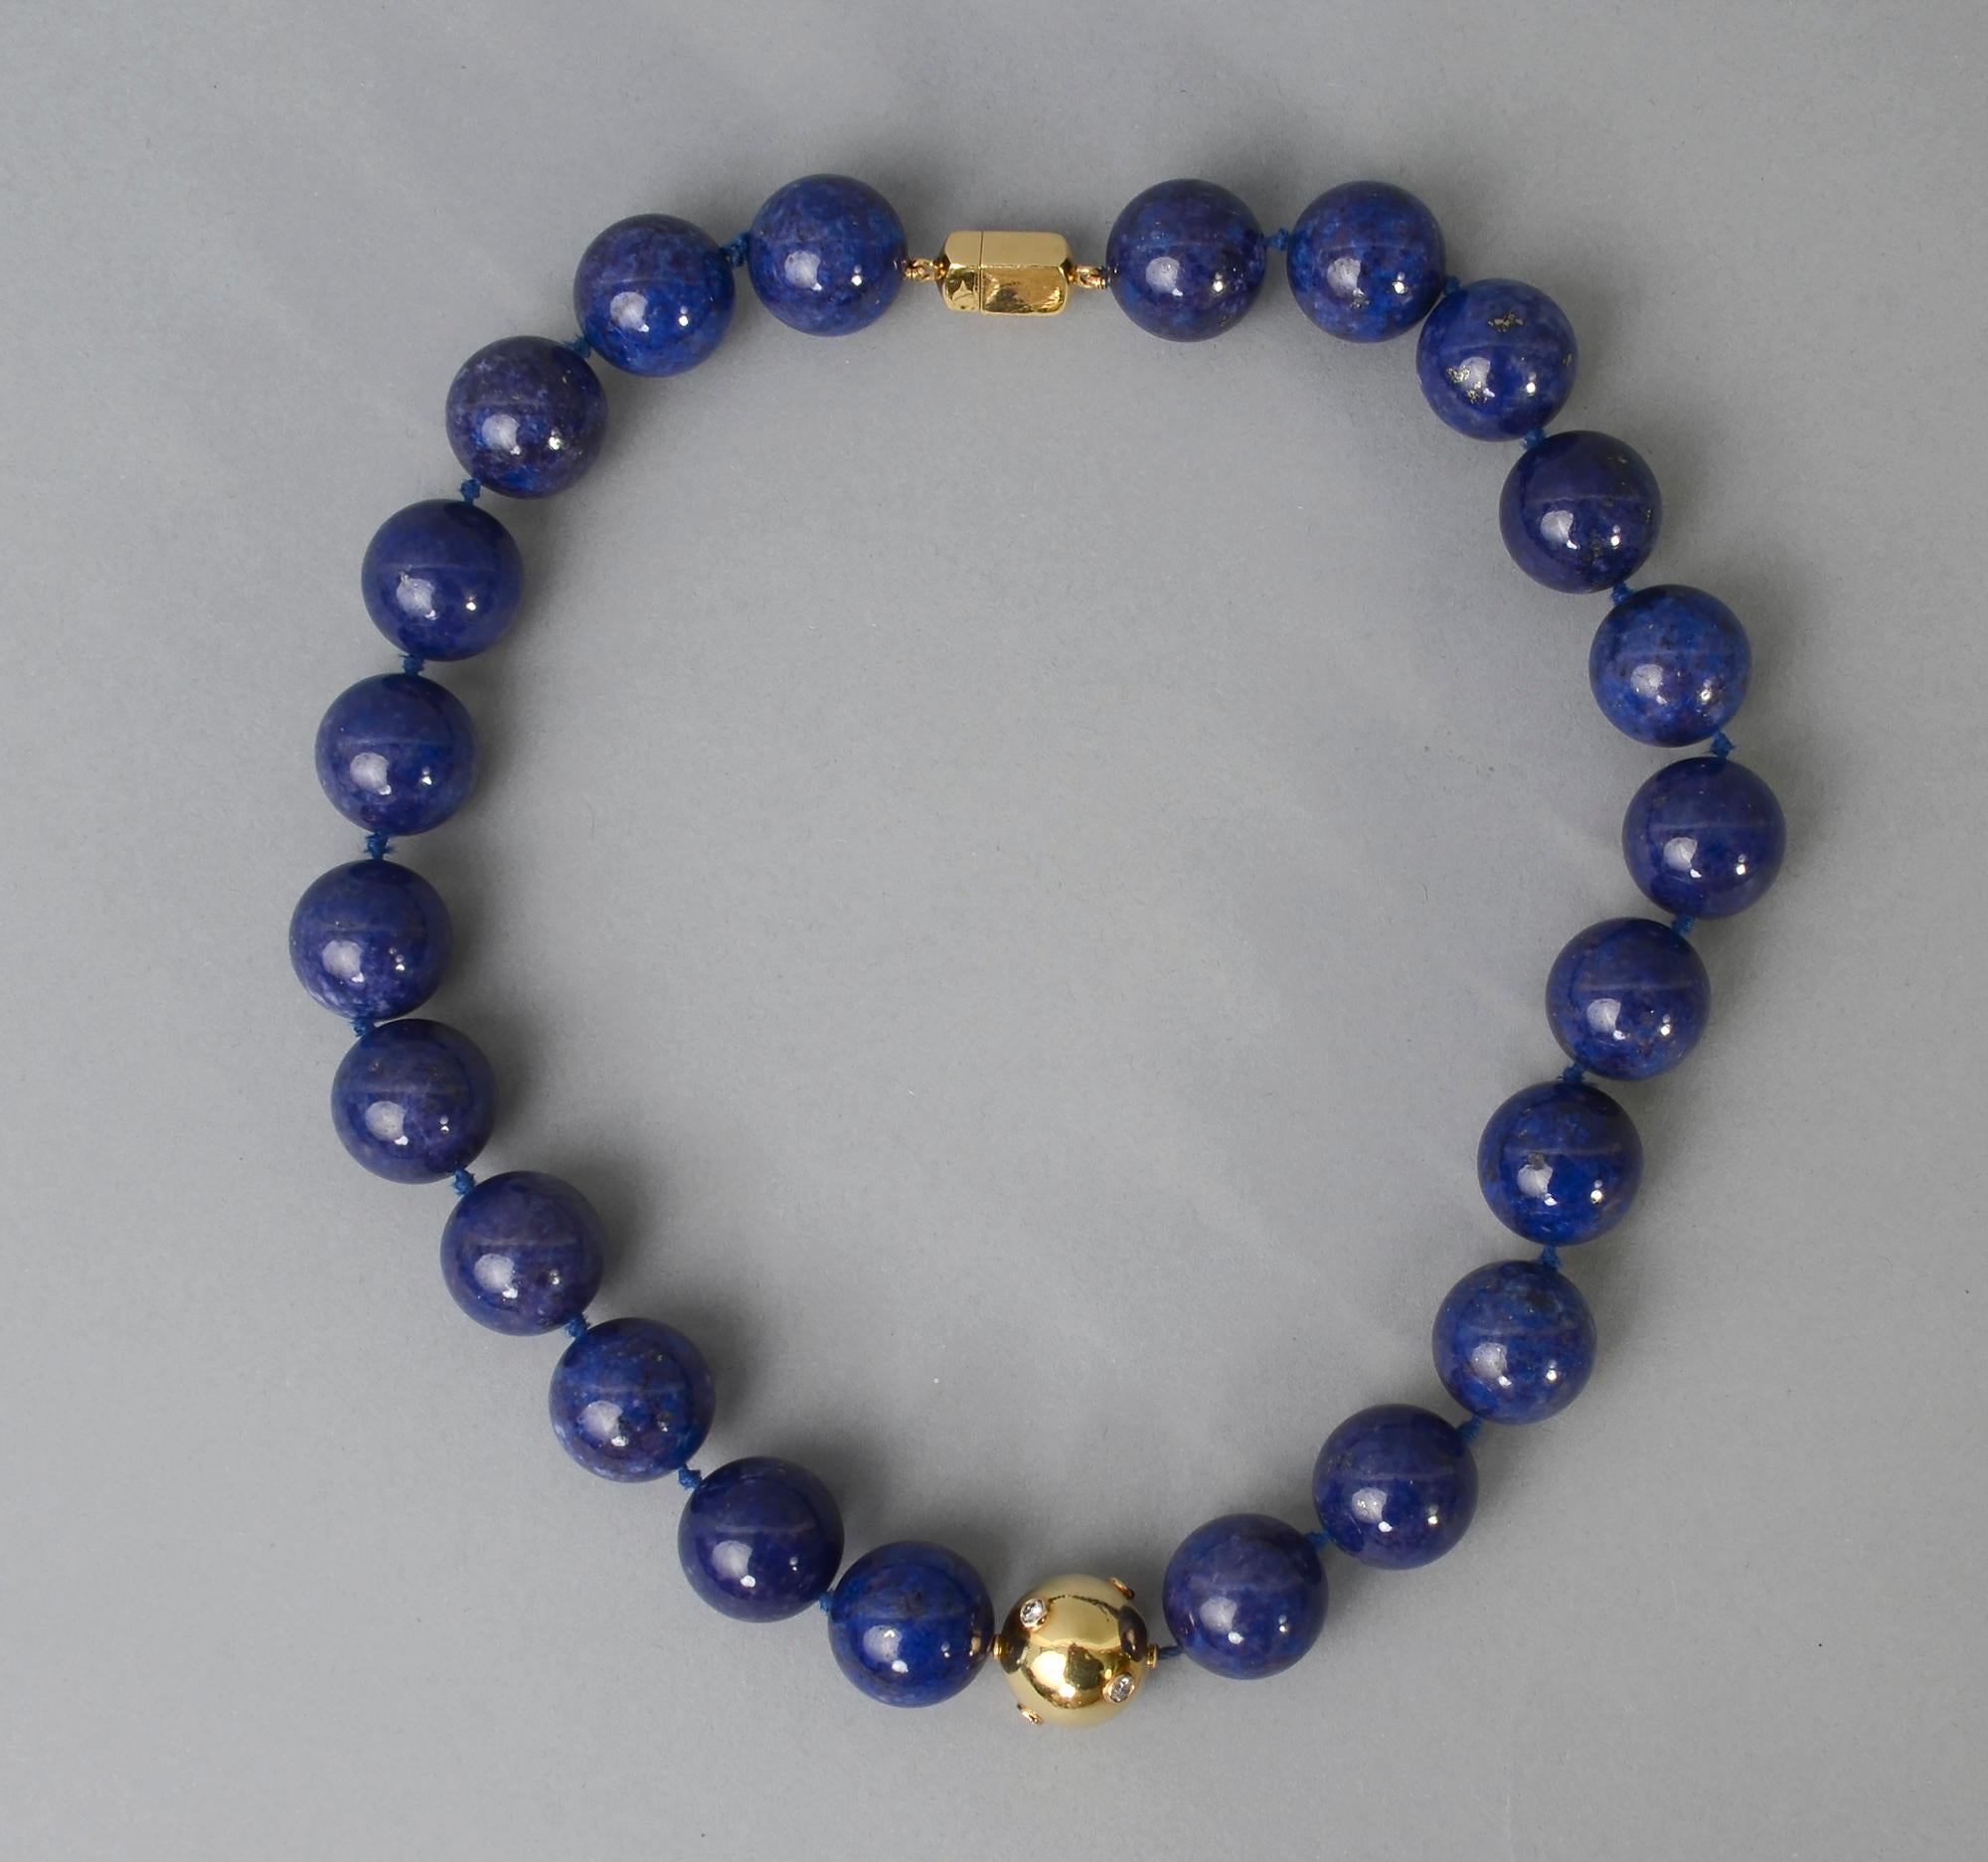 Richly colored natural lapis lazuli round beads necklace enhanced by a gold ball with diamonds.  The necklace has a wearable length of 19 inches. The lapis beads are 18.5mm. The six diamonds weigh slightly over half a carat. The ball and clasp are